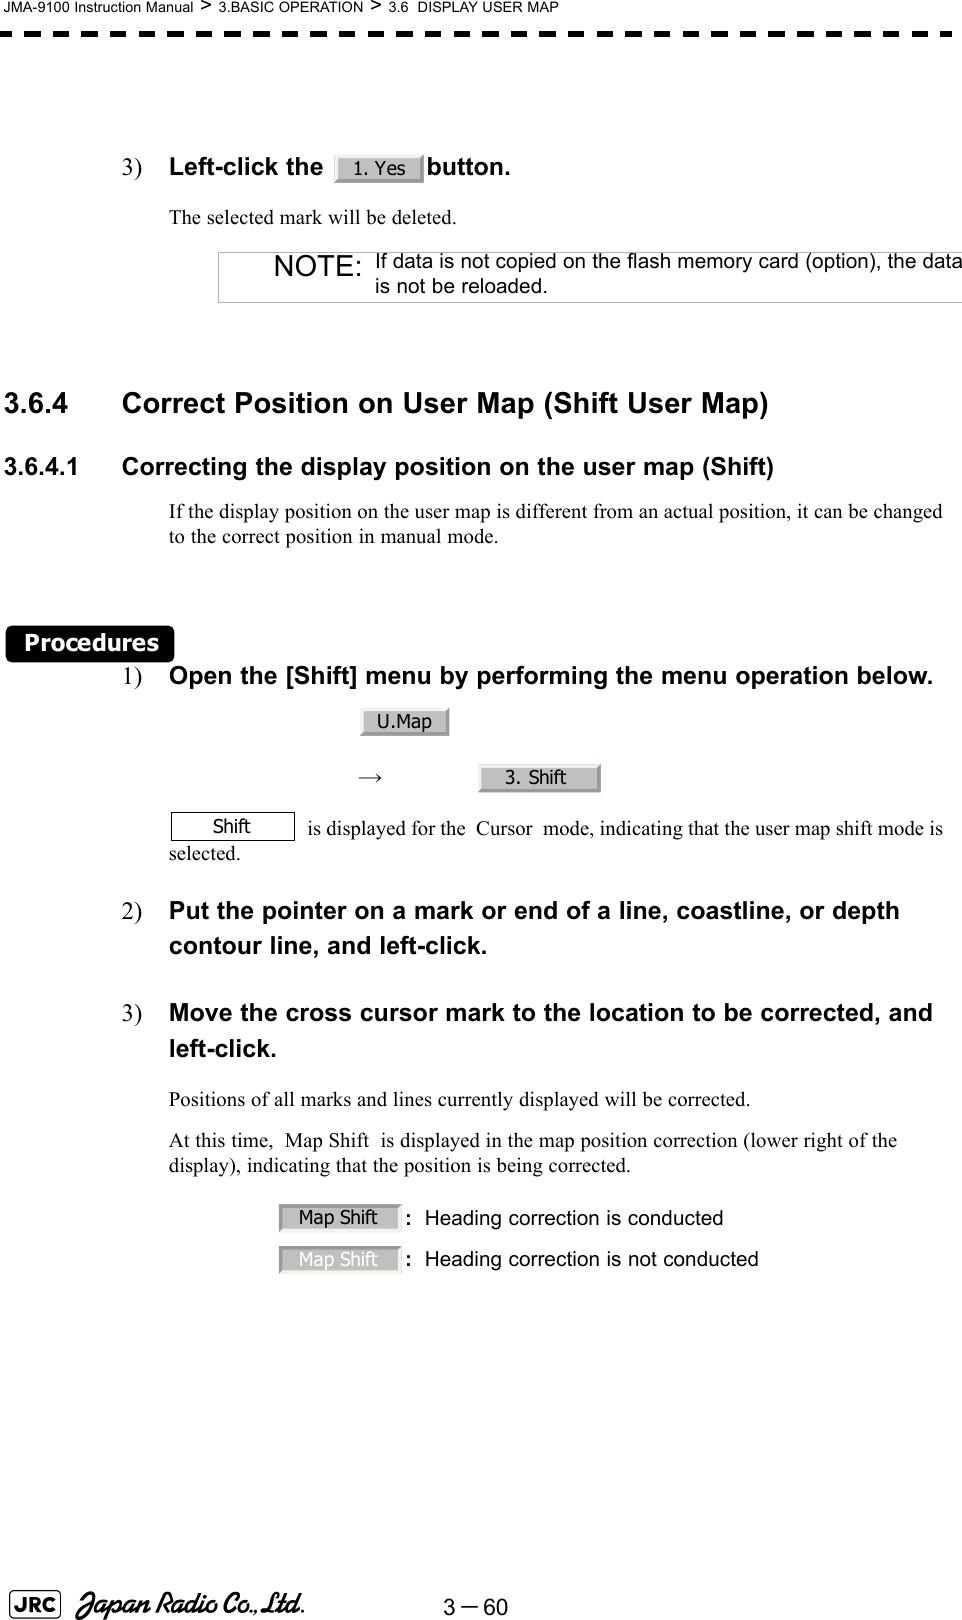 3－60JMA-9100 Instruction Manual &gt; 3.BASIC OPERATION &gt; 3.6  DISPLAY USER MAP3) Left-click the  button.The selected mark will be deleted. 3.6.4 Correct Position on User Map (Shift User Map)3.6.4.1 Correcting the display position on the user map (Shift)If the display position on the user map is different from an actual position, it can be changed to the correct position in manual mode.Procedures1) Open the [Shift] menu by performing the menu operation below.　　 →　 is displayed for the  Cursor  mode, indicating that the user map shift mode is selected.2) Put the pointer on a mark or end of a line, coastline, or depth contour line, and left-click.3) Move the cross cursor mark to the location to be corrected, and left-click.Positions of all marks and lines currently displayed will be corrected.At this time,  Map Shift  is displayed in the map position correction (lower right of the display), indicating that the position is being corrected.NOTE: If data is not copied on the flash memory card (option), the datais not be reloaded.:Heading correction is conducted:Heading correction is not conducted1. YesU.Map3. ShiftShiftMap ShiftMap Shift 